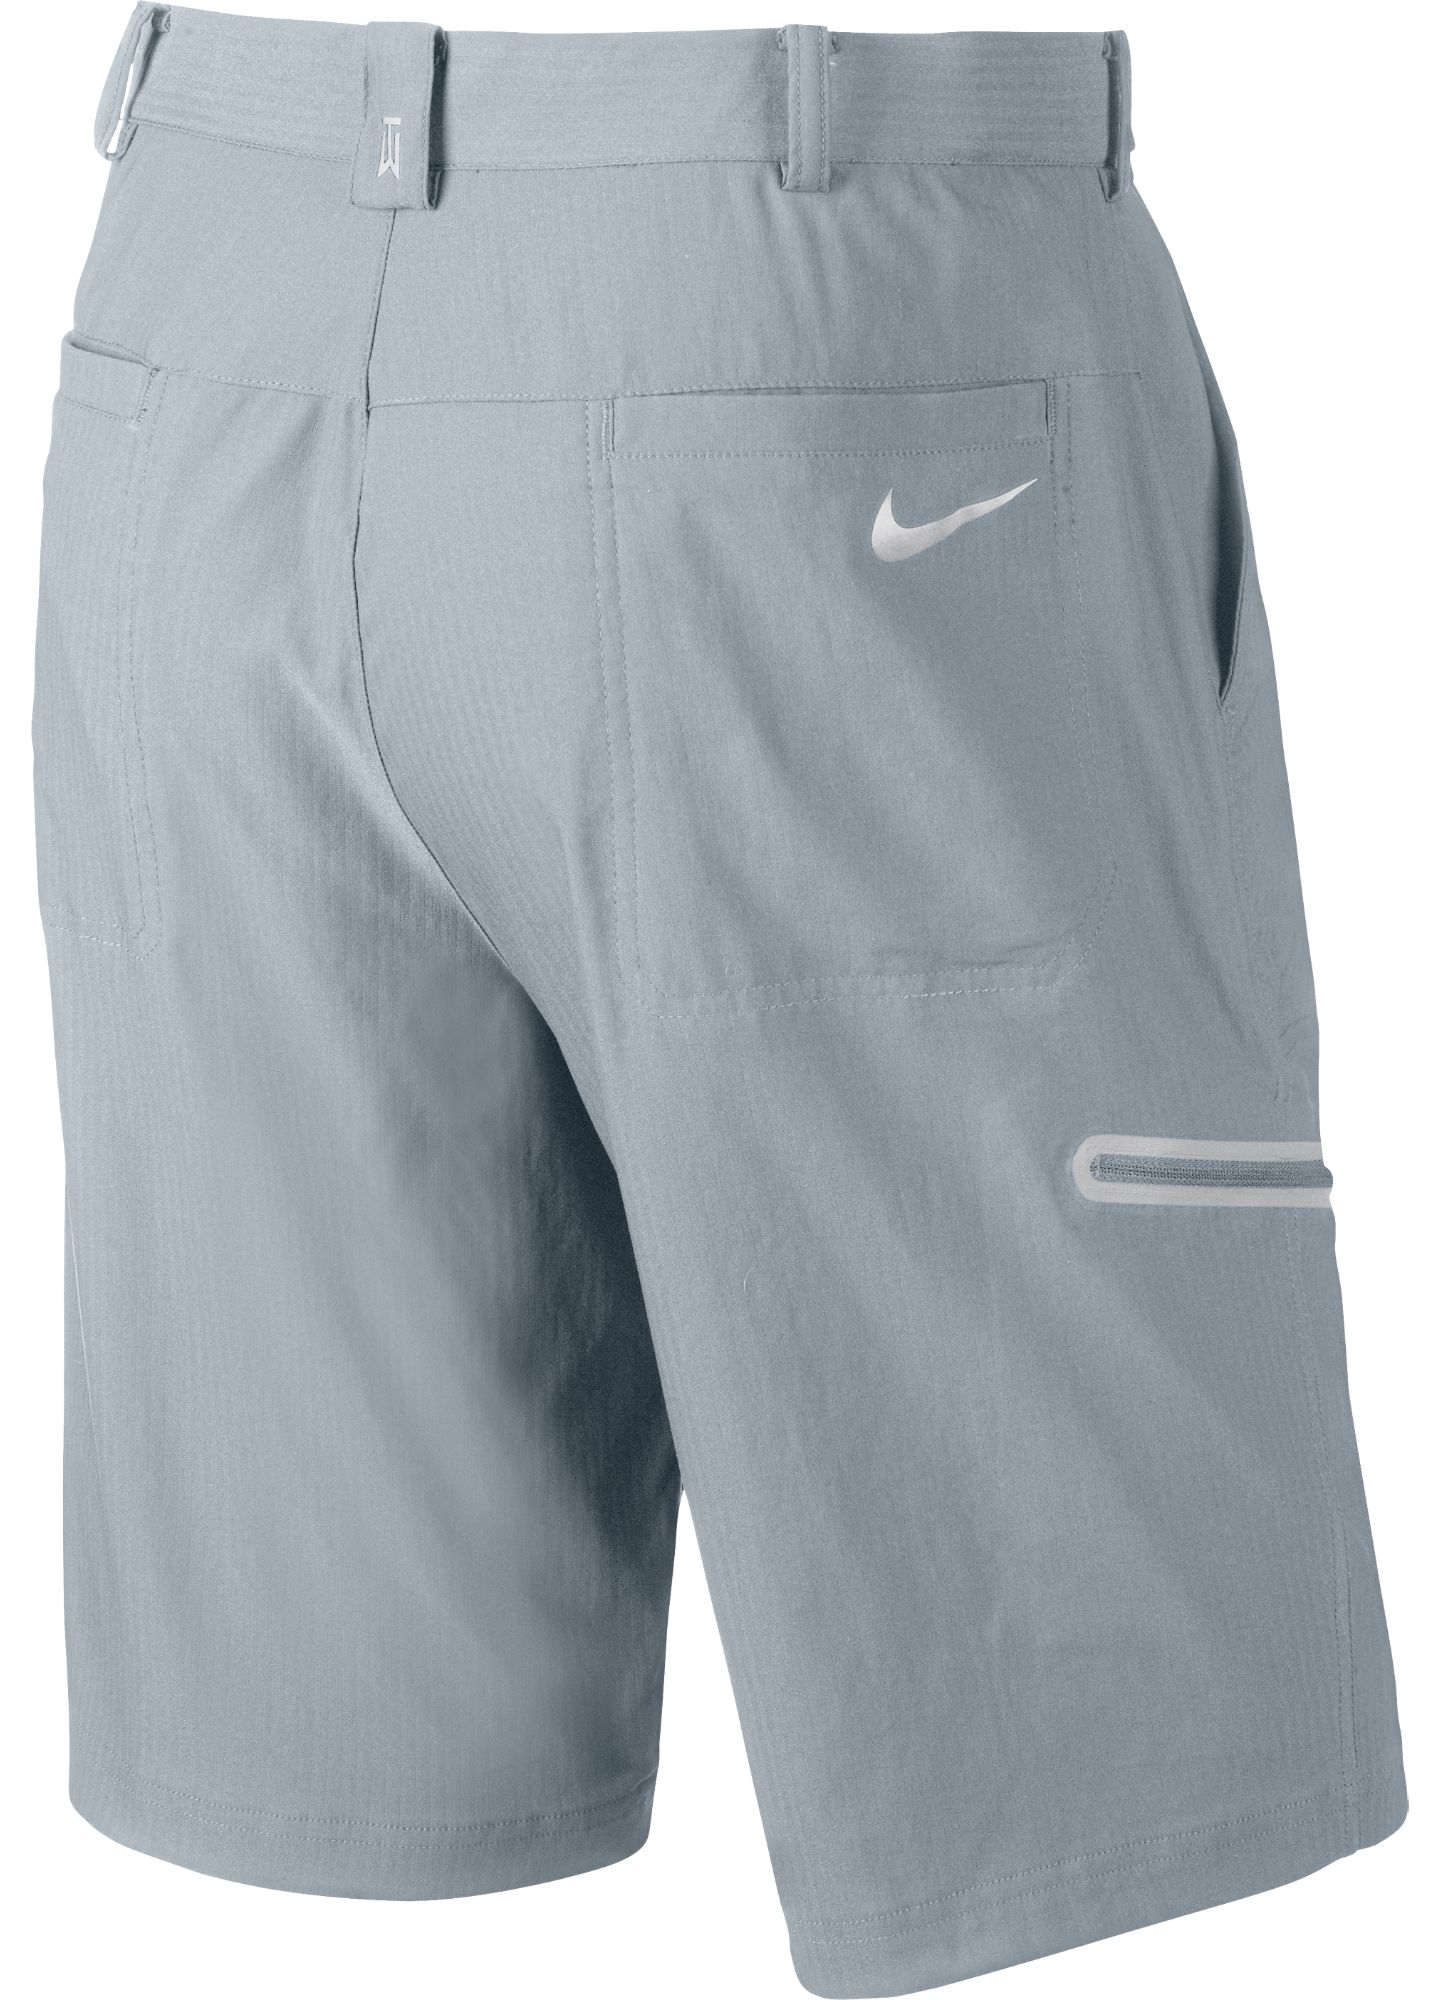 tiger woods practice golf shorts